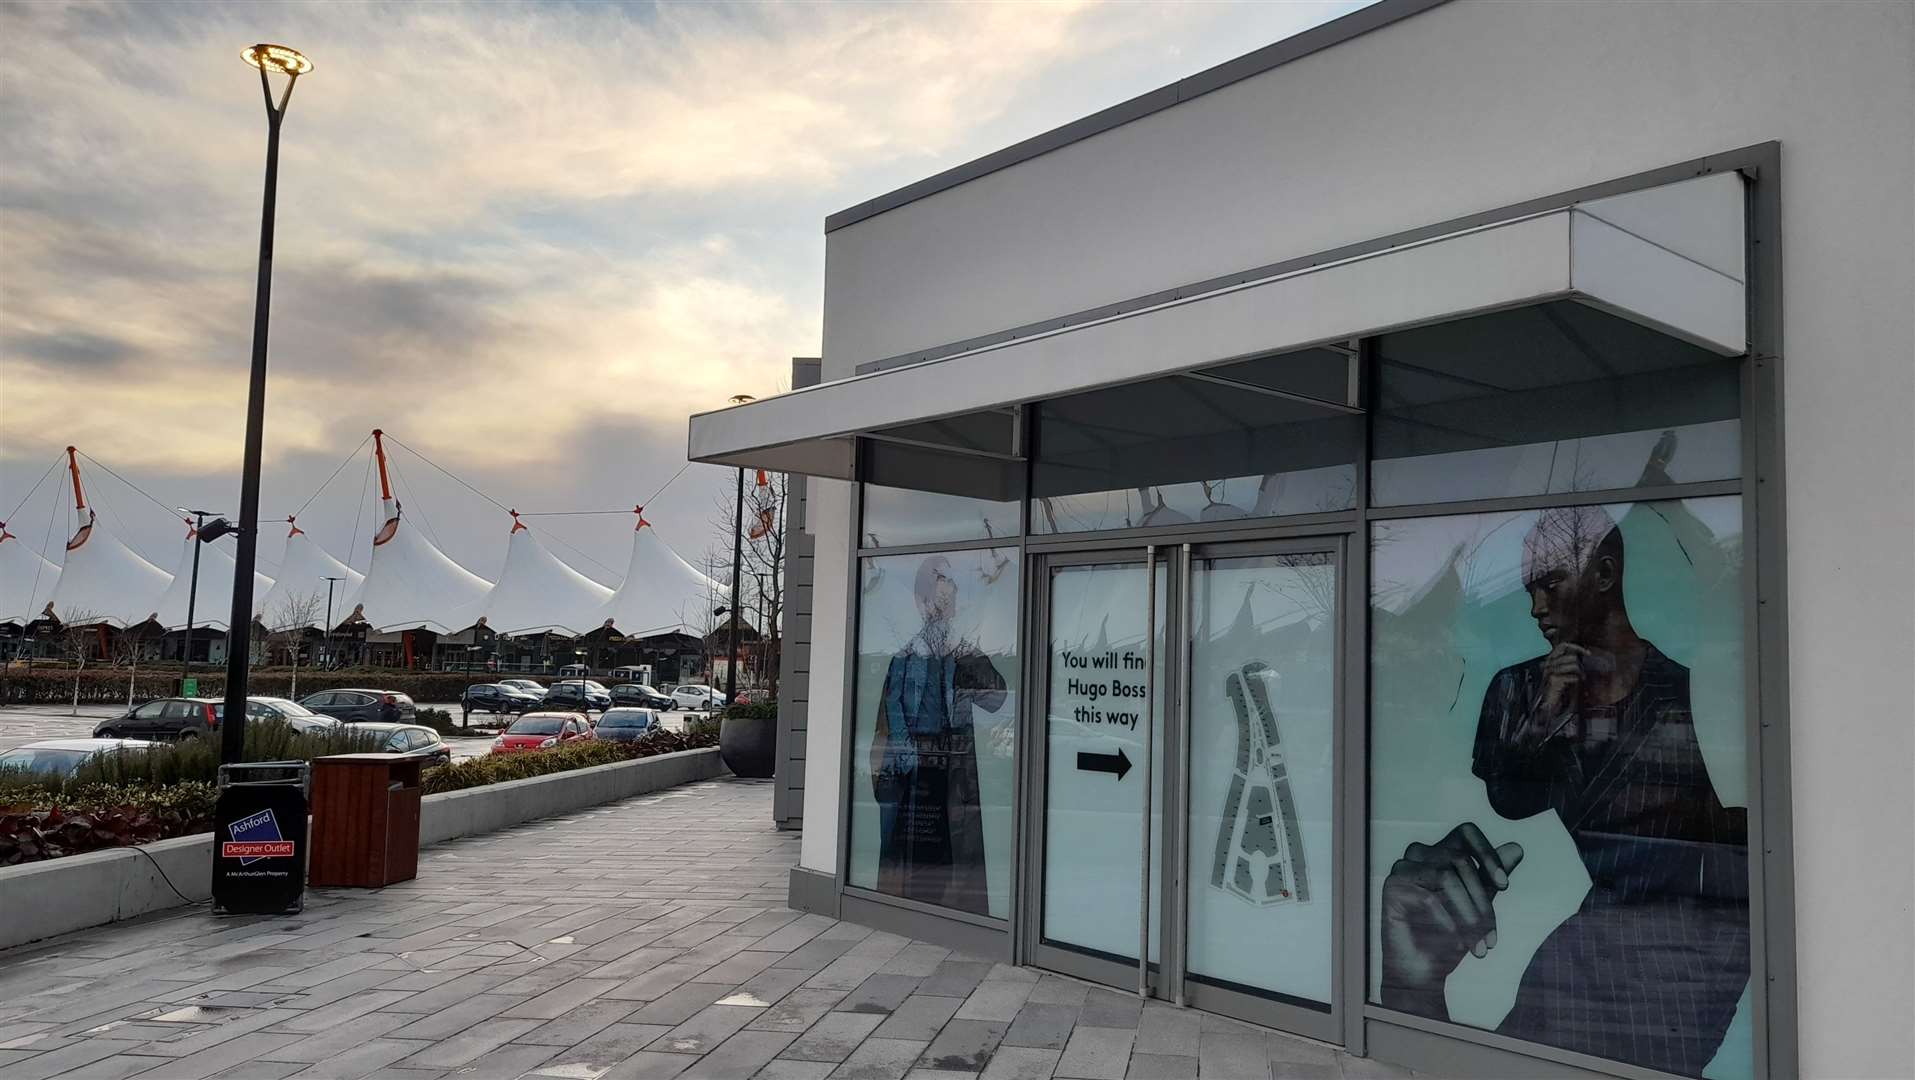 The Outlet's extension was approved in 2015 and opened in November 2019